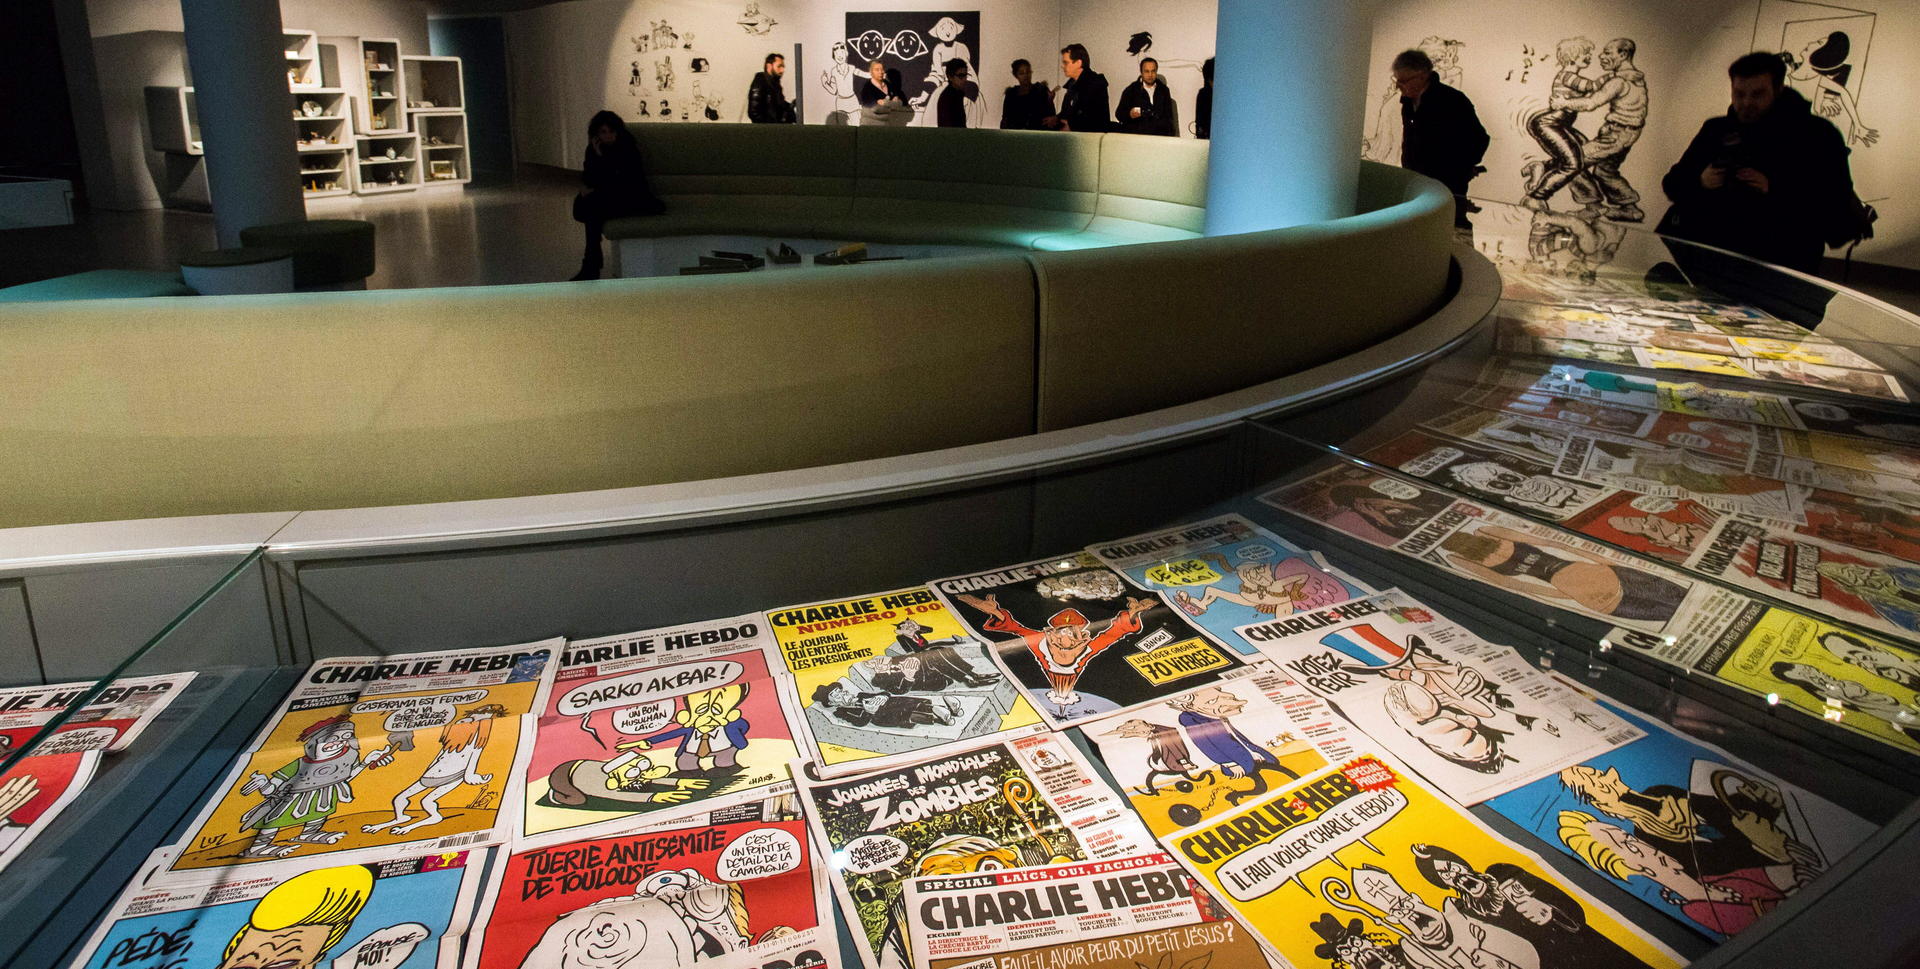 Issues of French satirical weekly Charlie Hebdo, 12 of whose artist were killed in a Paris attack, on display at the festival.Photo: AFP